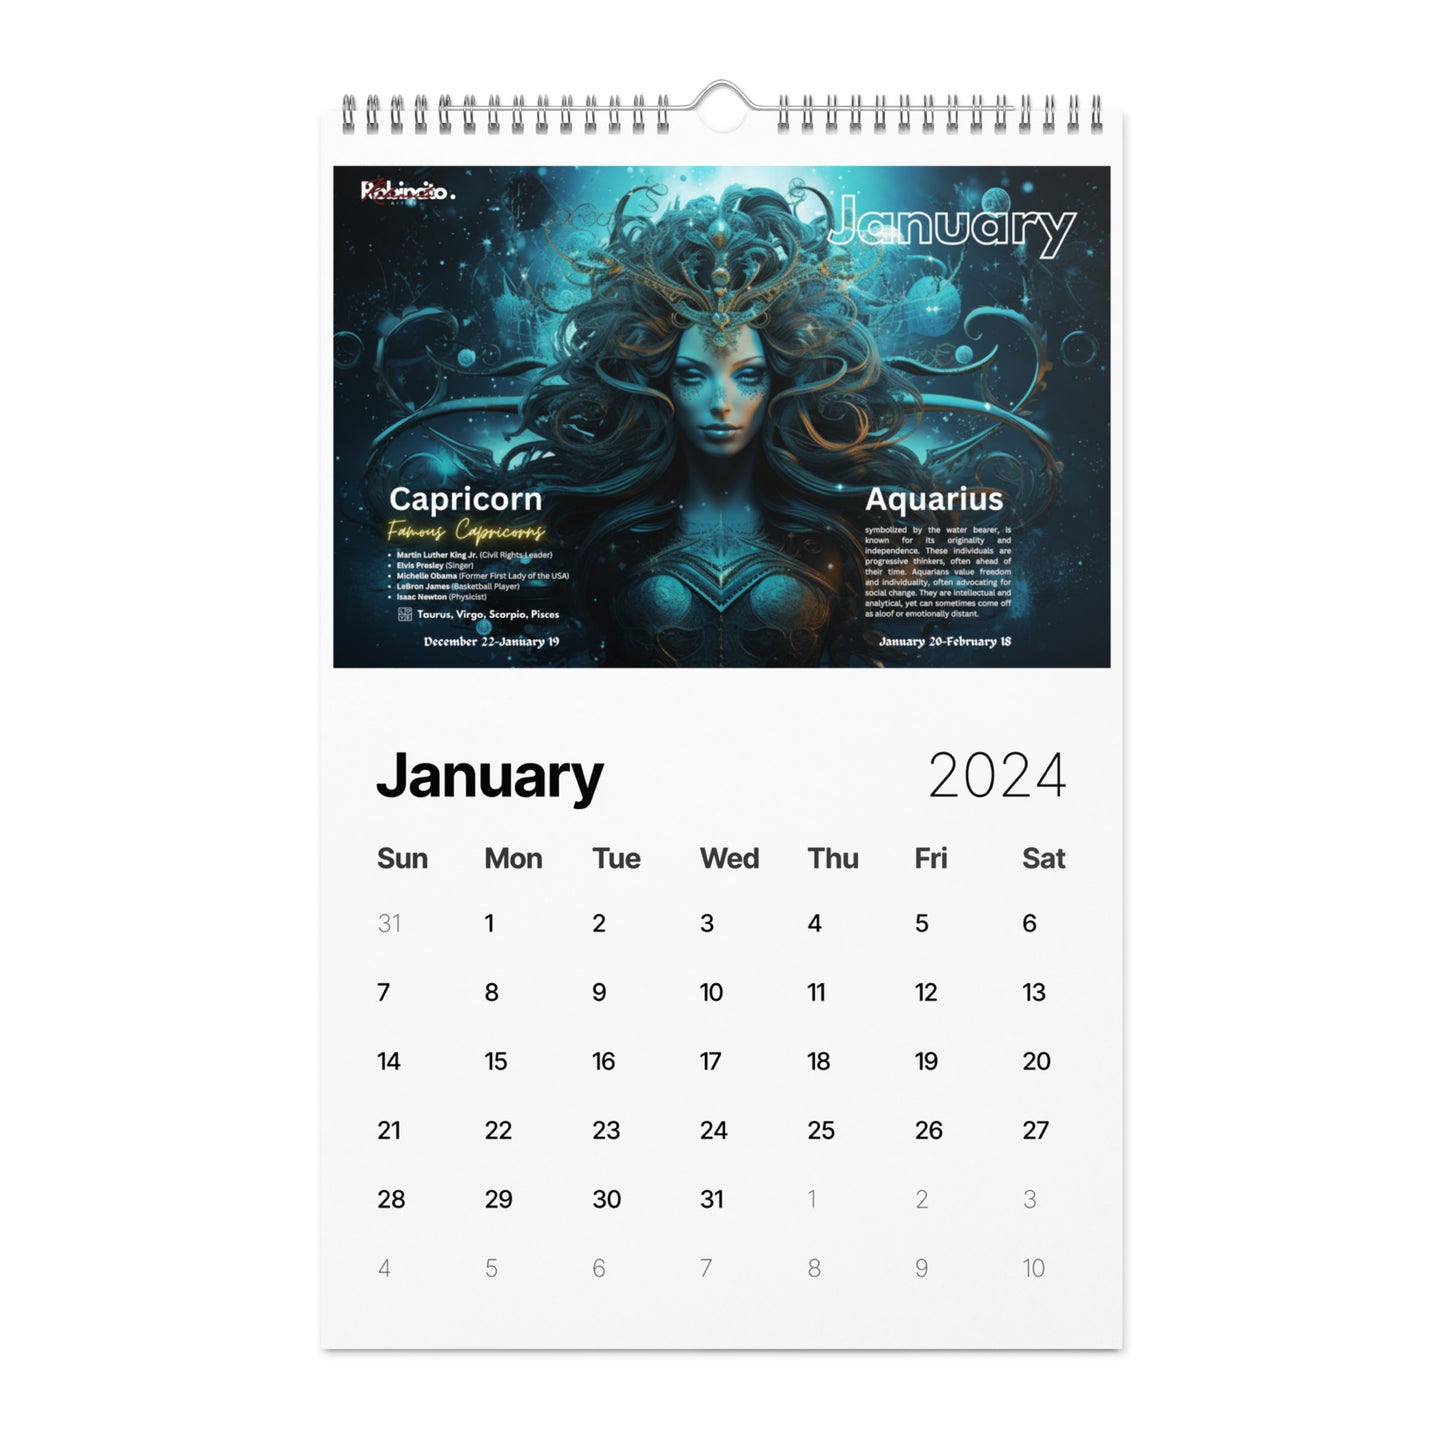 Sign Of The Time 2024 Wall Calendar